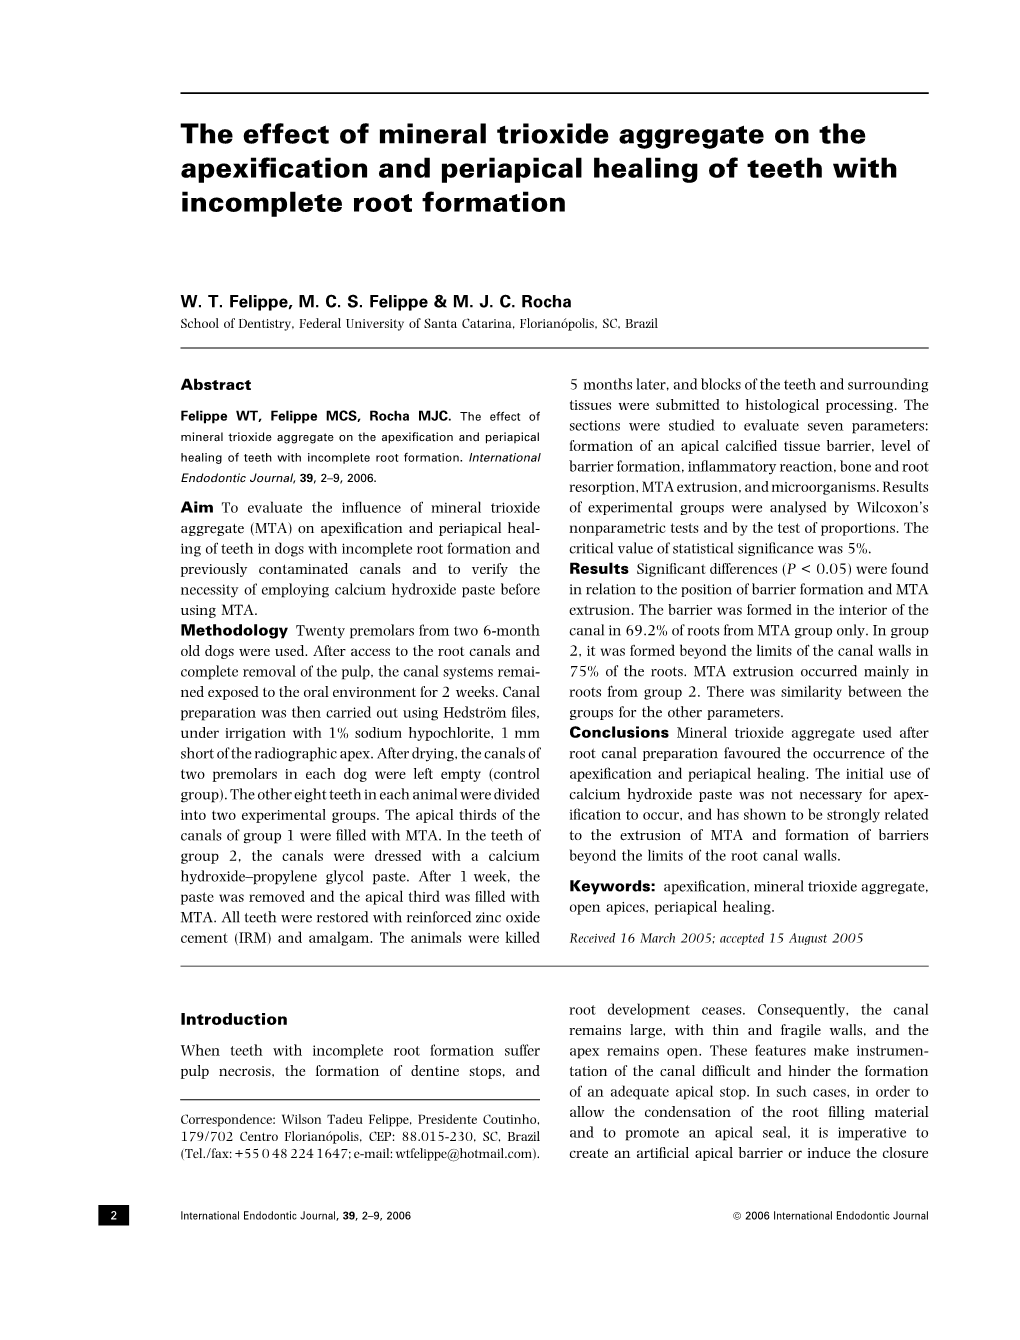 The Effect of MTA on the Apexification and Periapical Healing of Teeth With